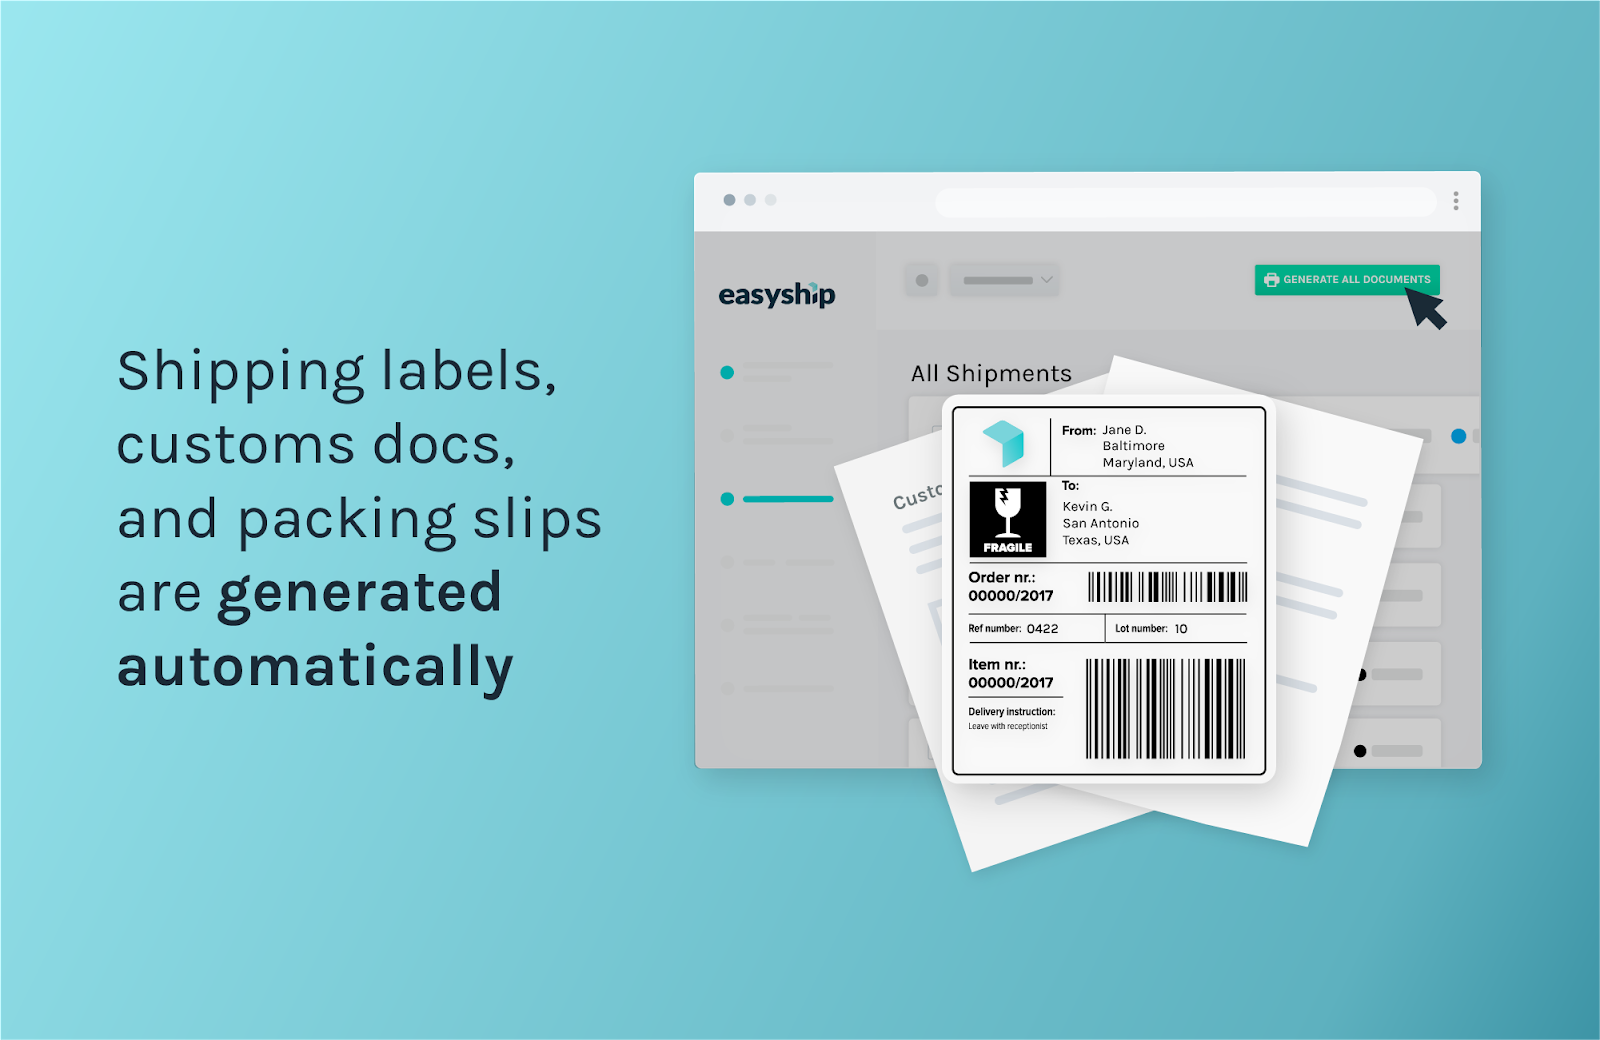 How to Print Shipping Labels